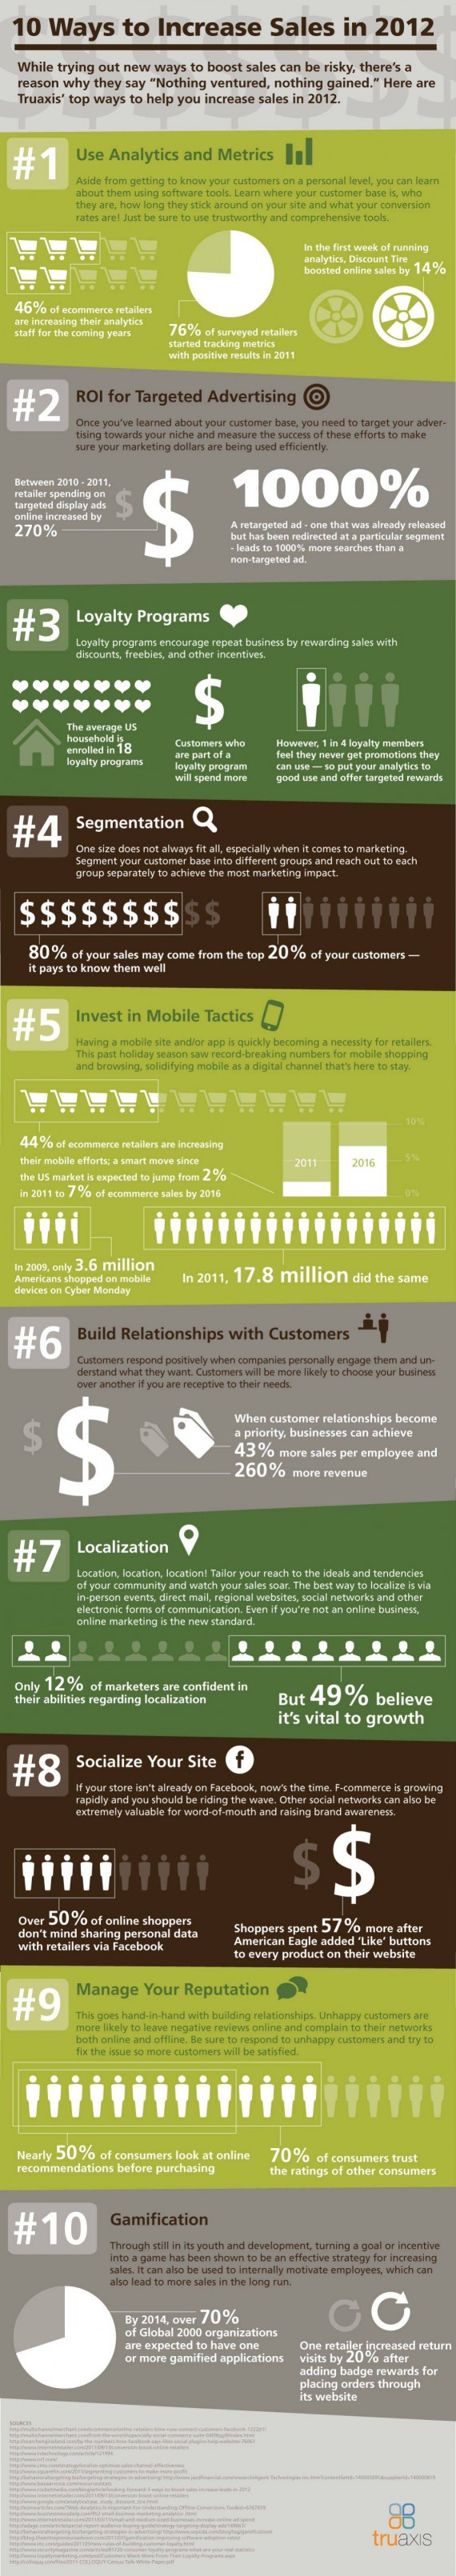 10 Ways to Increase Sales in 2012